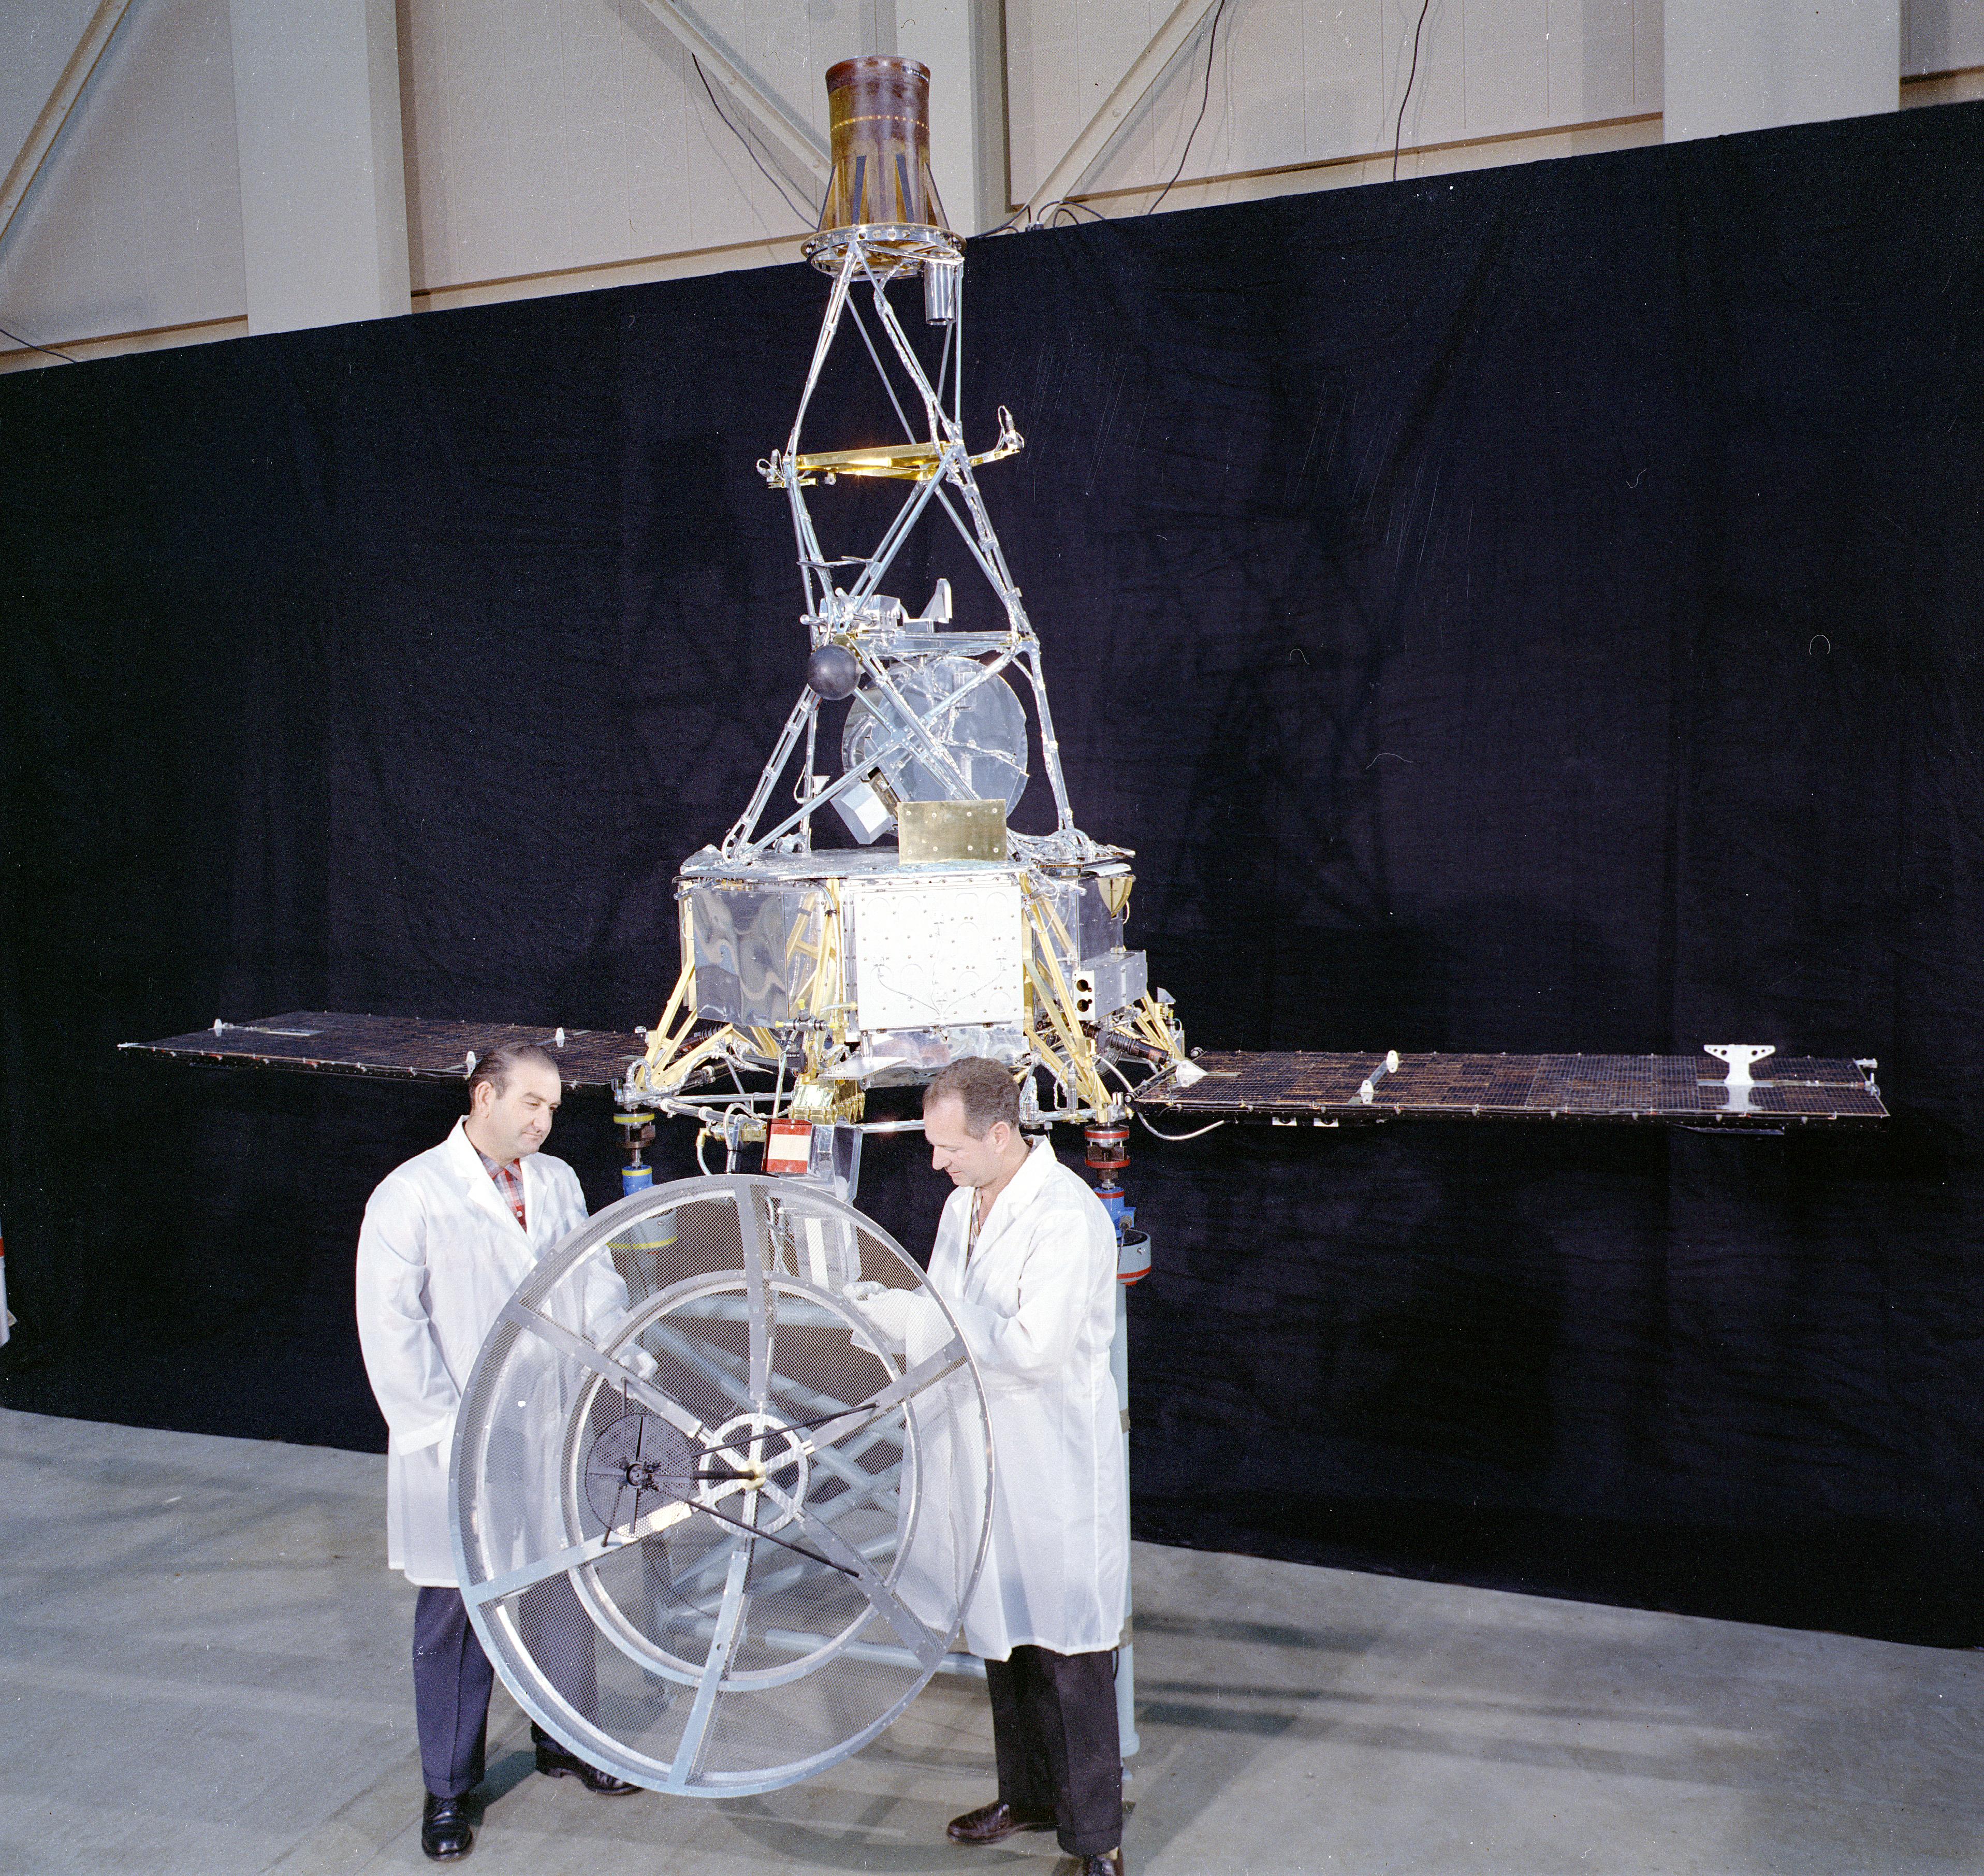 Two engineers in white lab boats inspect the Mariner 1 spacecraft. The spacecraft is about twice as tall as the men.